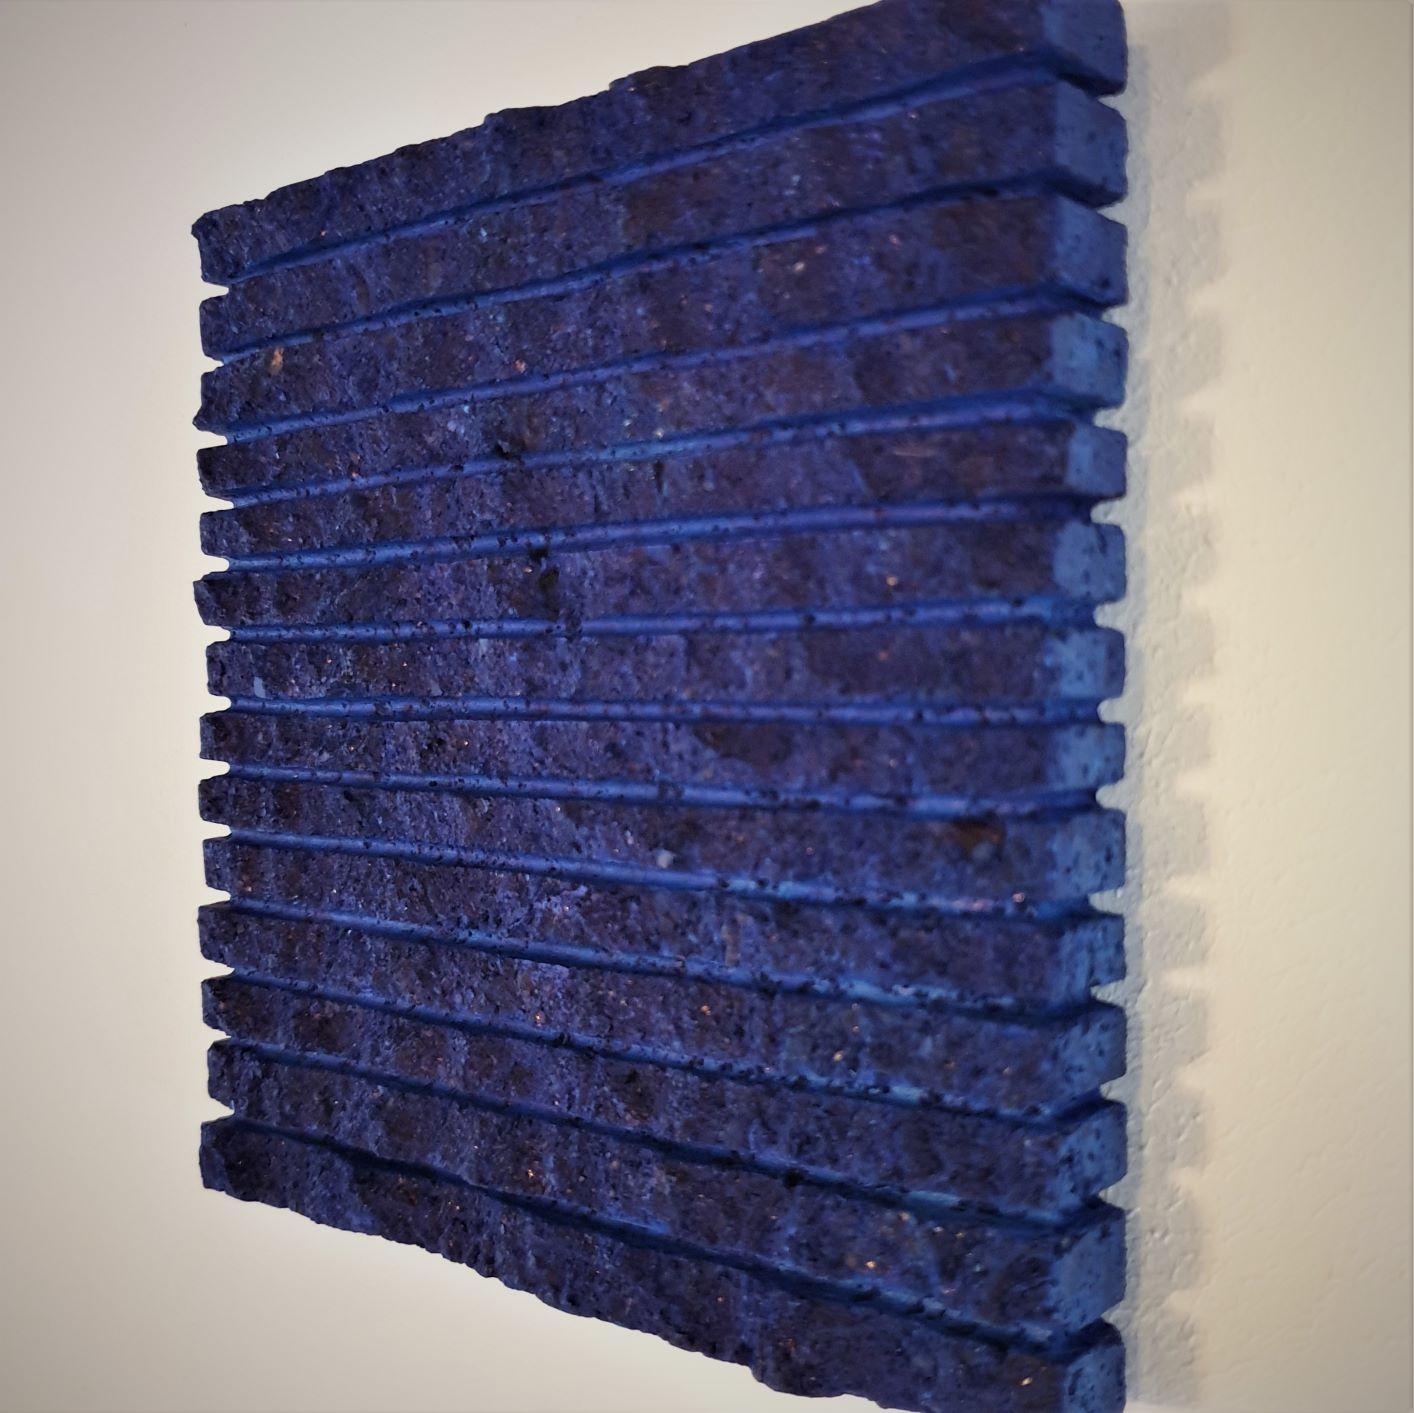 o.T. (Bl15HL) - blue contemporary modern wall sculpture painting relief - Blue Abstract Painting by Dieter Kränzlein